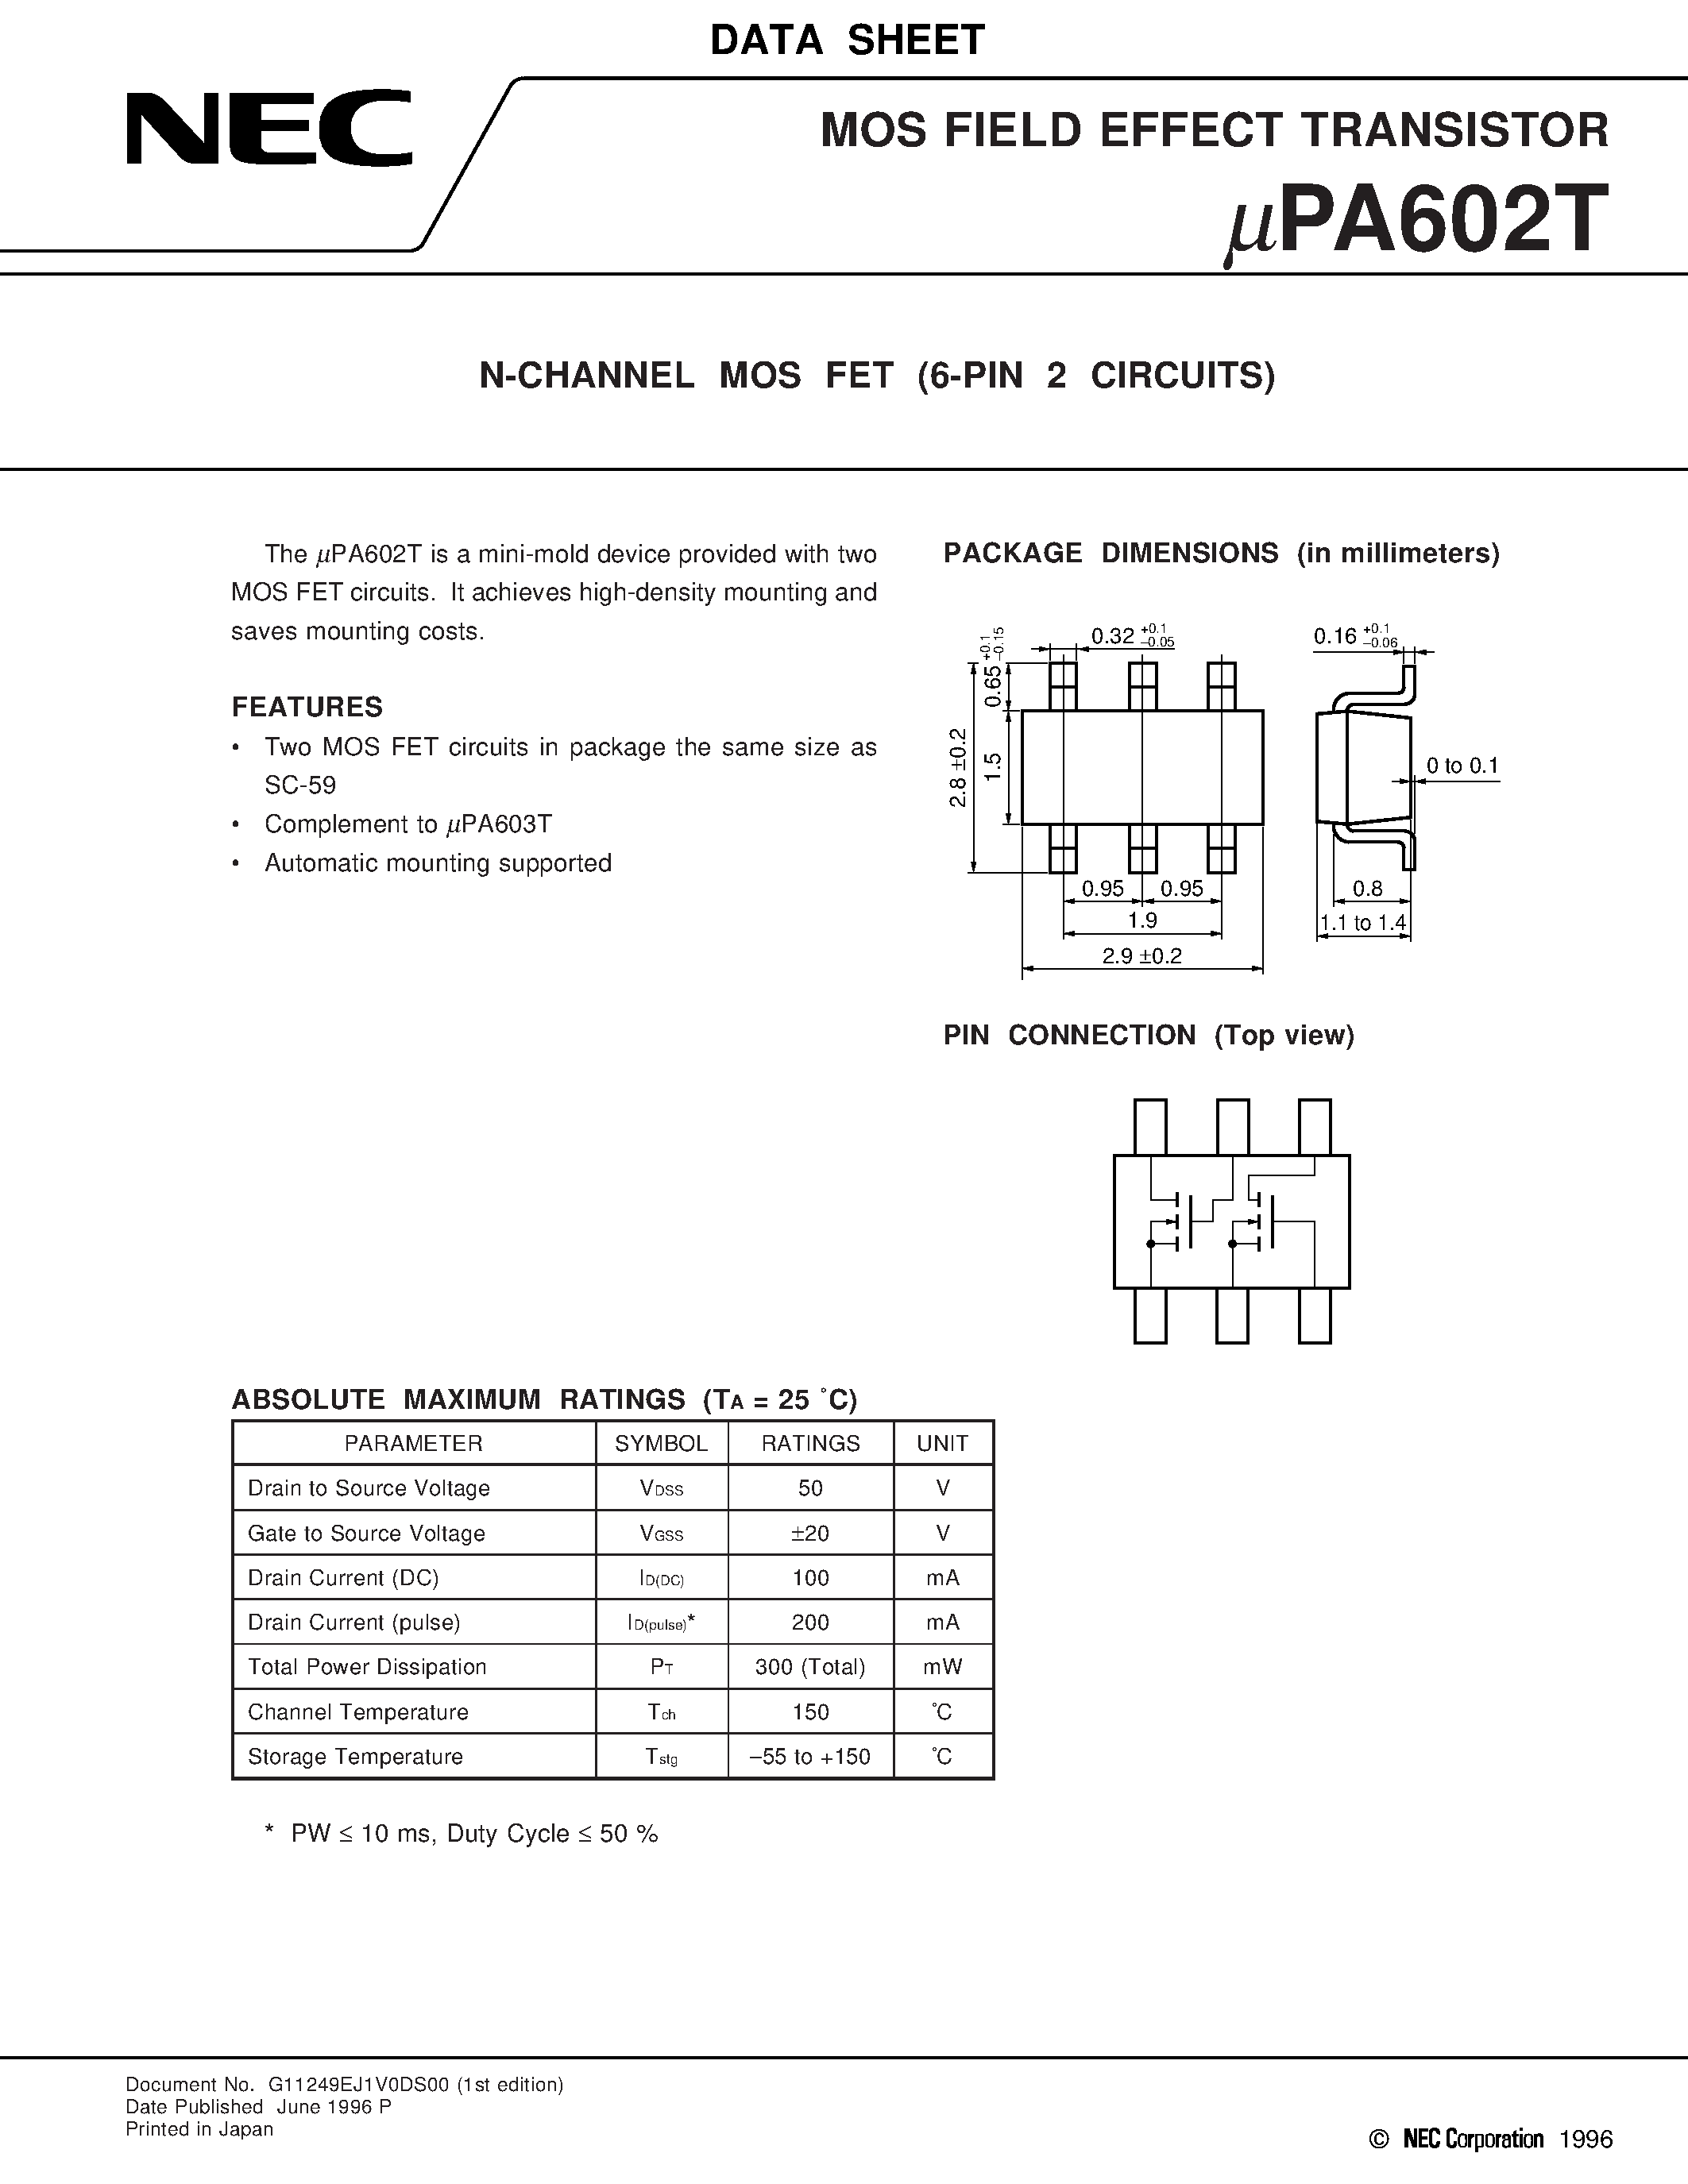 Datasheet UPA602T - N-CHANNEL MOS FET 6-PIN 2 CIRCUITS page 1